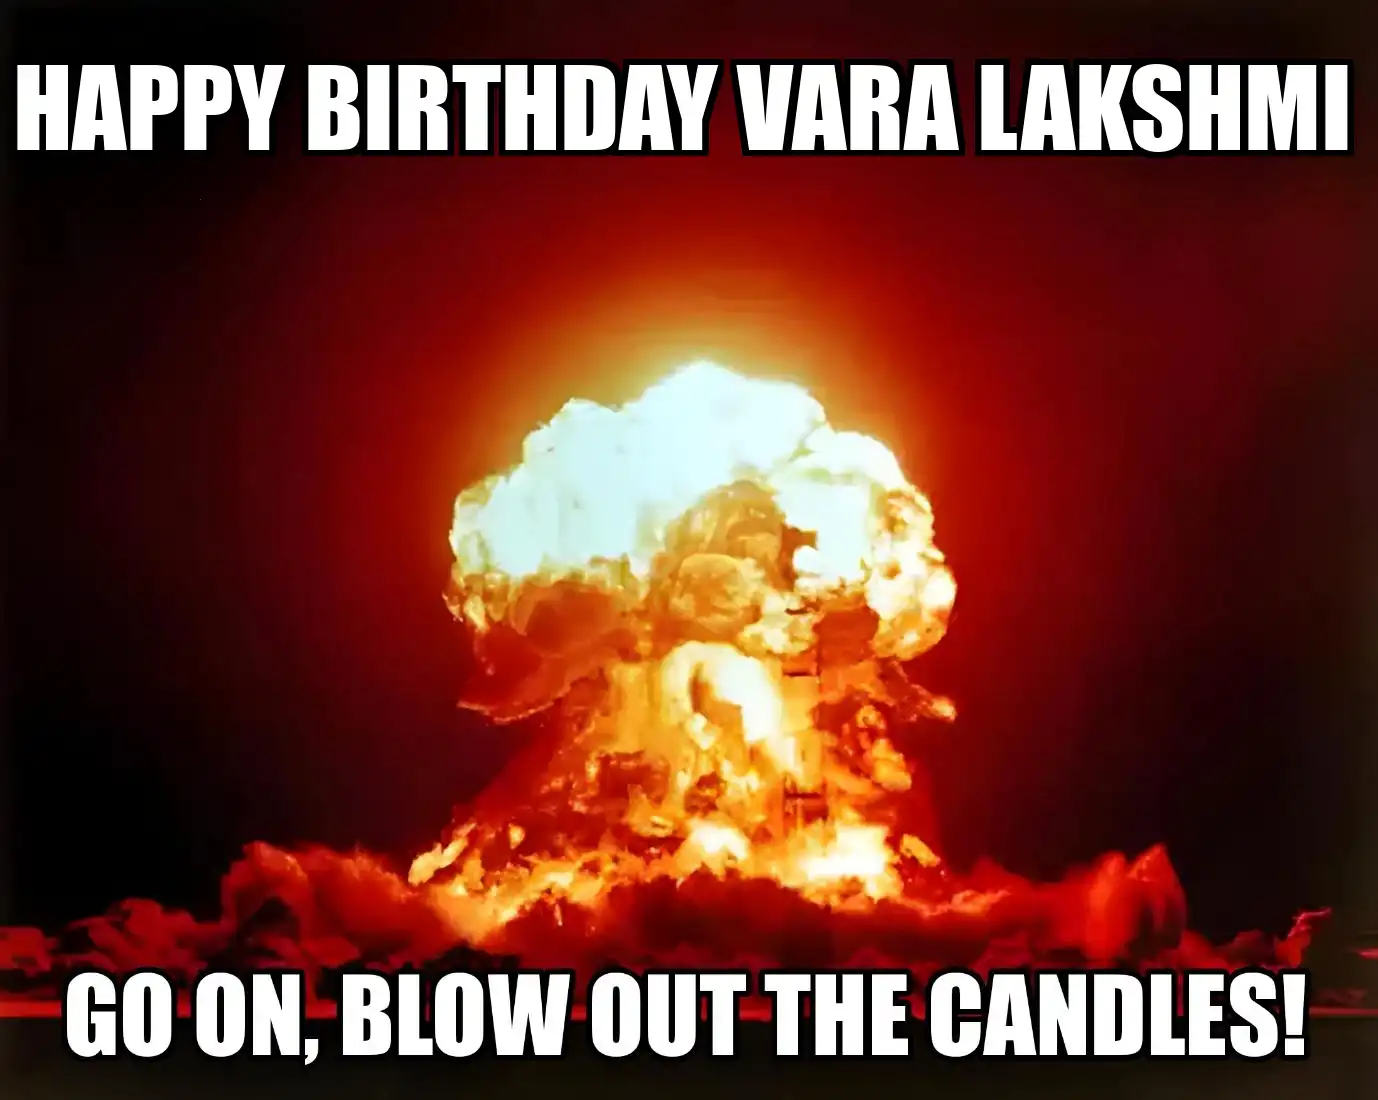 Happy Birthday Vara Lakshmi Go On Blow Out The Candles Meme